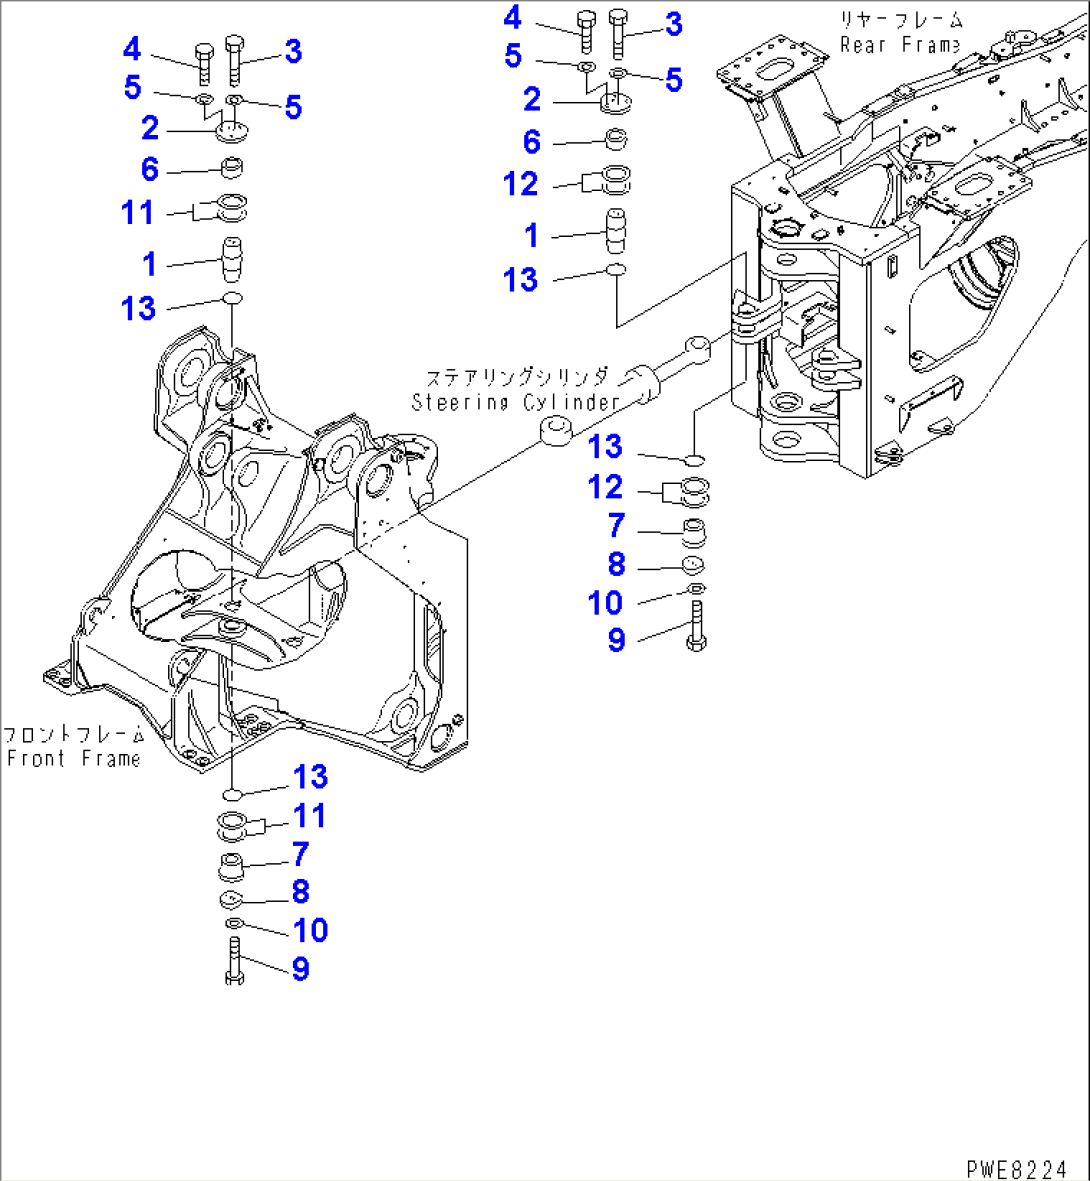 REAR FRAME (CYLINDER MOUNTING PARTS)(#51075-)